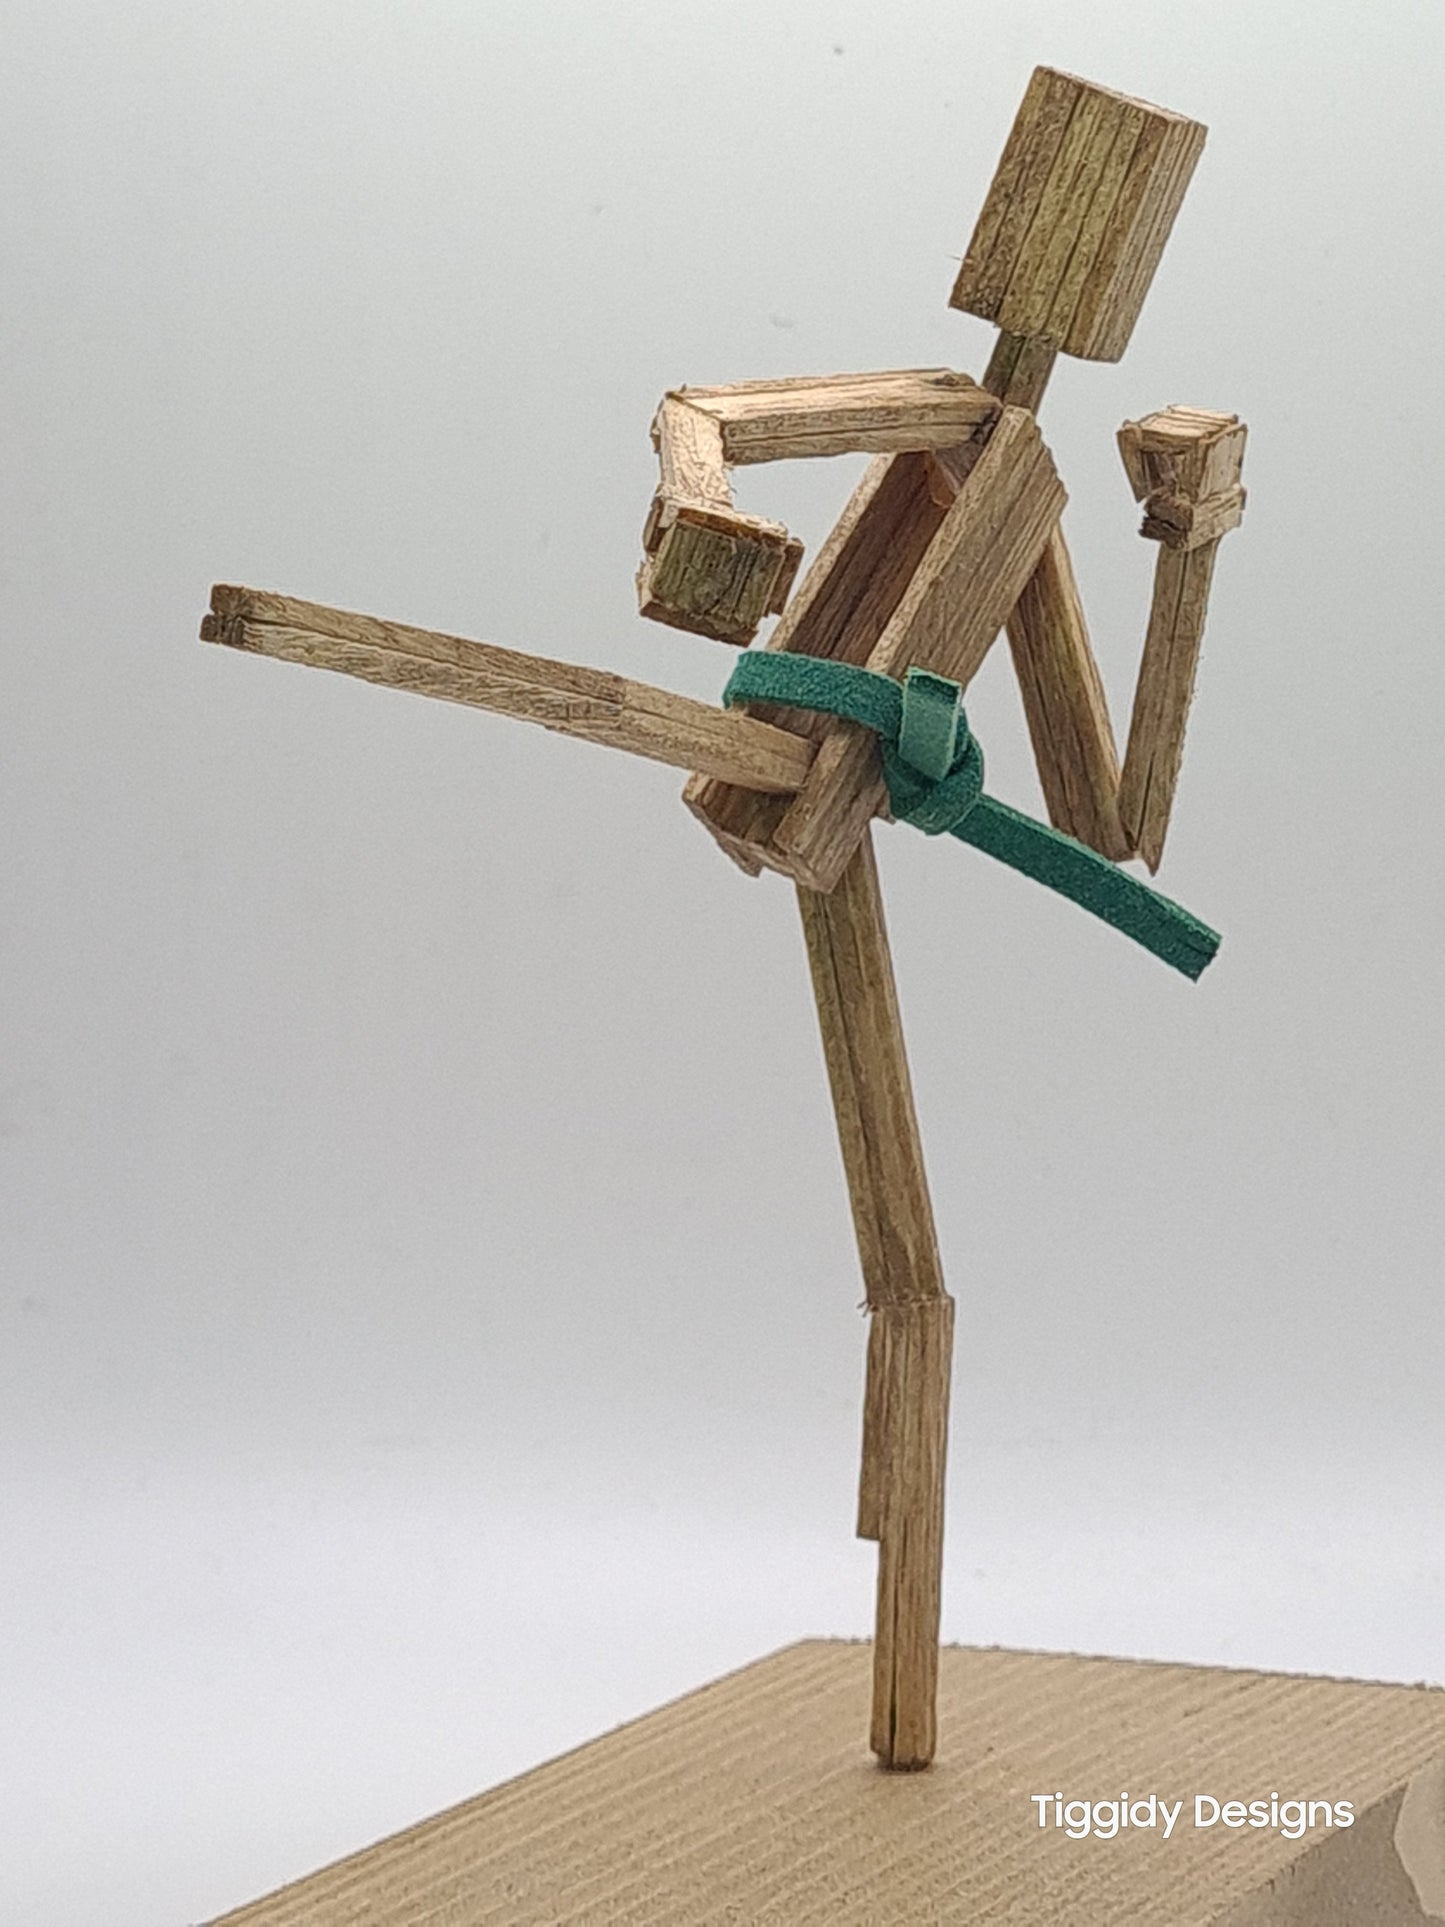 Side Kick - Handcrafted Wooden Matchstick Figures - Gifts, Ornaments and Decor By Tiggidy Designs